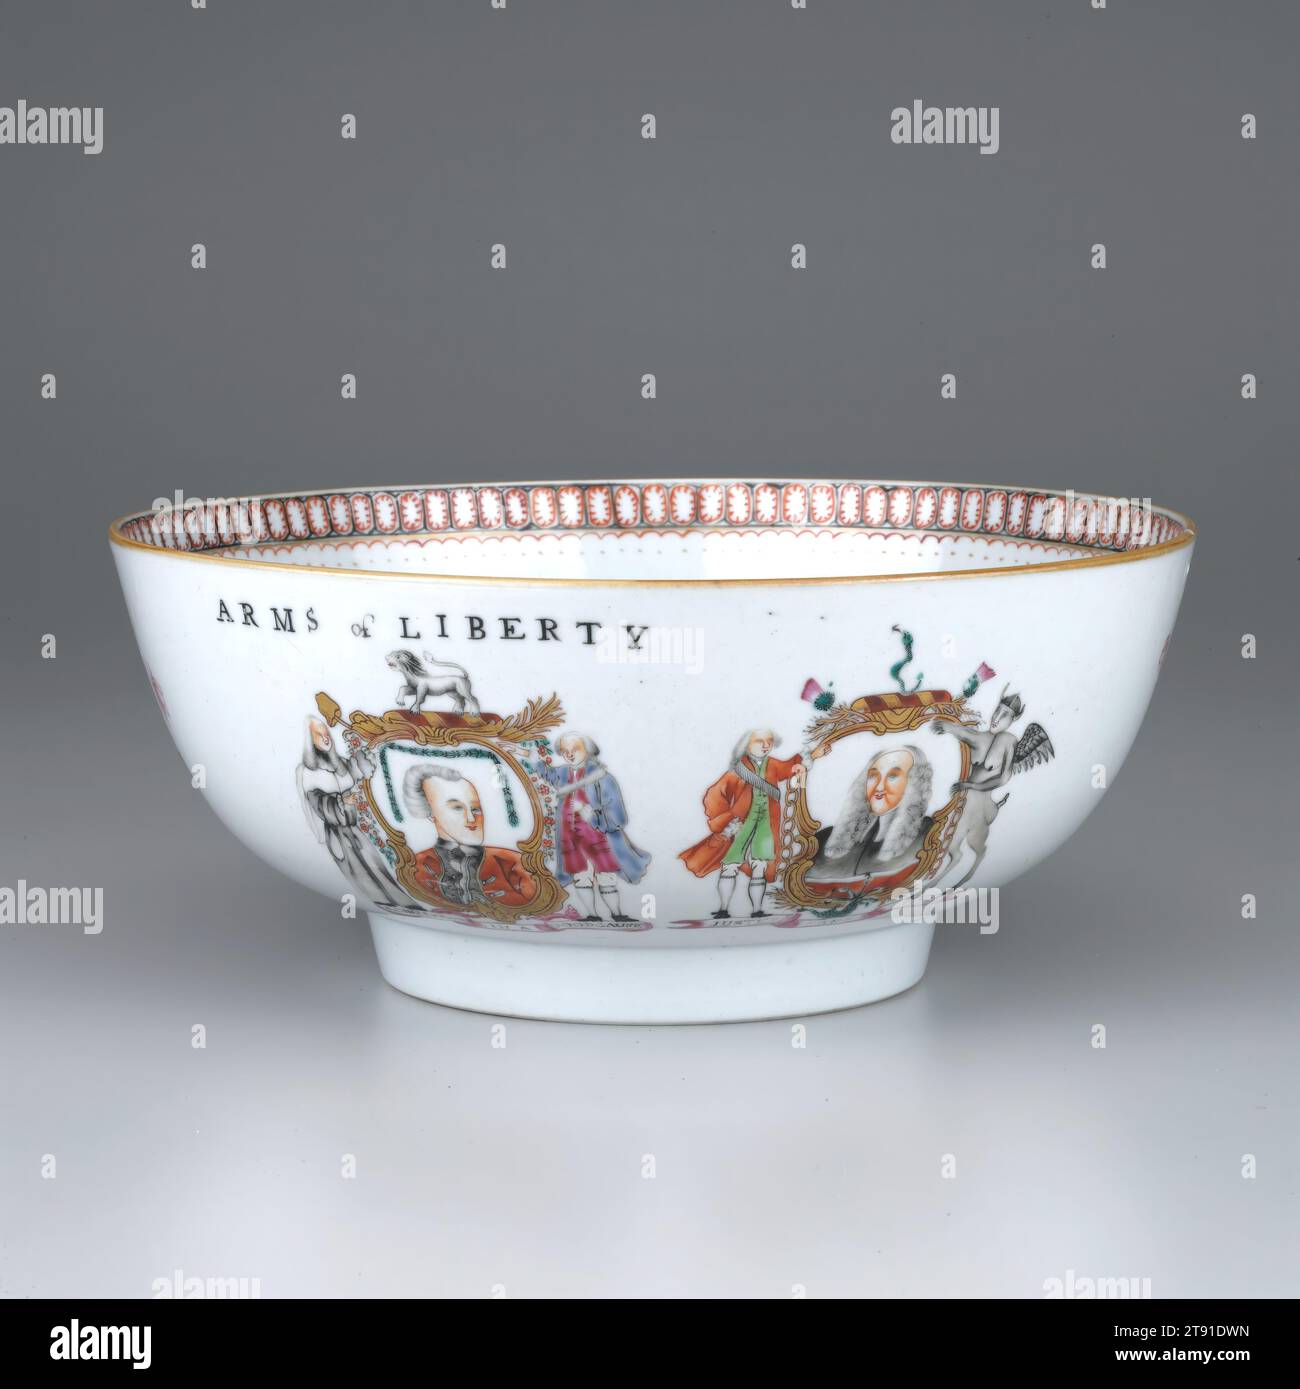 Arms of Liberty' punch bowl, c. 1770, 4 1/4 x 10 in. (10.8 x 25.4 cm), Porcelain, China, 18th century, This punch bowl's pseudo-armorial was satirically drawn to poke fun at English political figures of the late 1760s for their opposition to John Wilkes (1727-97). A proponent of civil liberties and American independence, Wilkes was elected several times to the House of Commons, but repeatedly expelled for attacking King George III and his loyalists Stock Photo